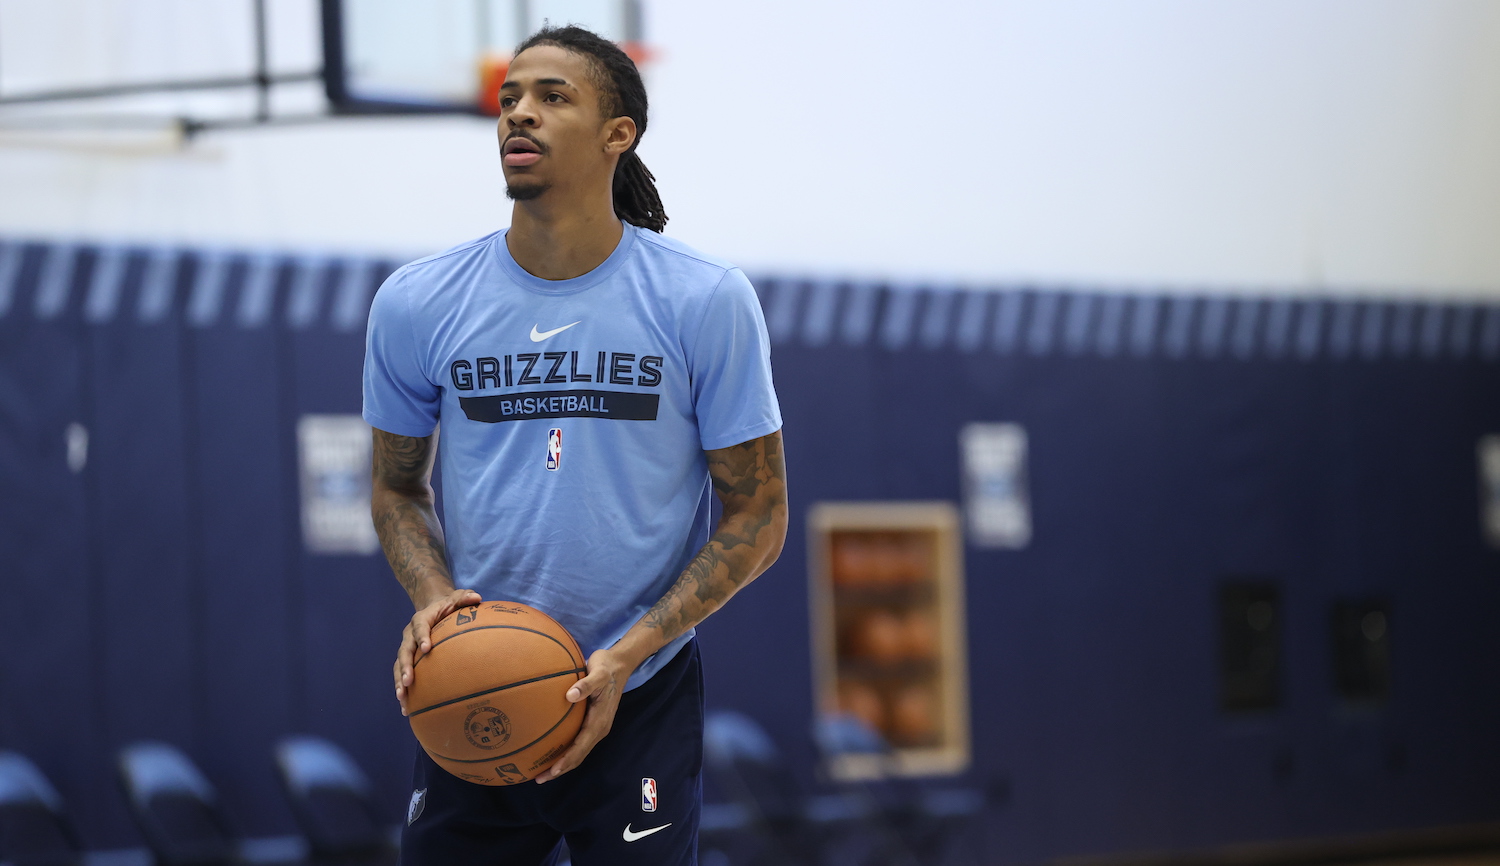 MEMPHIS, TN - FEBRUARY 27: Ja Morant #12 of the Memphis Grizzlies participates in an all access team practice on February 27, 2023 at FedExForum in Memphis, Tennessee. NOTE TO USER: User expressly acknowledges and agrees that, by downloading and or using this photograph, User is consenting to the terms and conditions of the Getty Images License Agreement. Mandatory Copyright Notice: Copyright 2023 NBAE (Photo by Joe Murphy/NBAE via Getty Images)